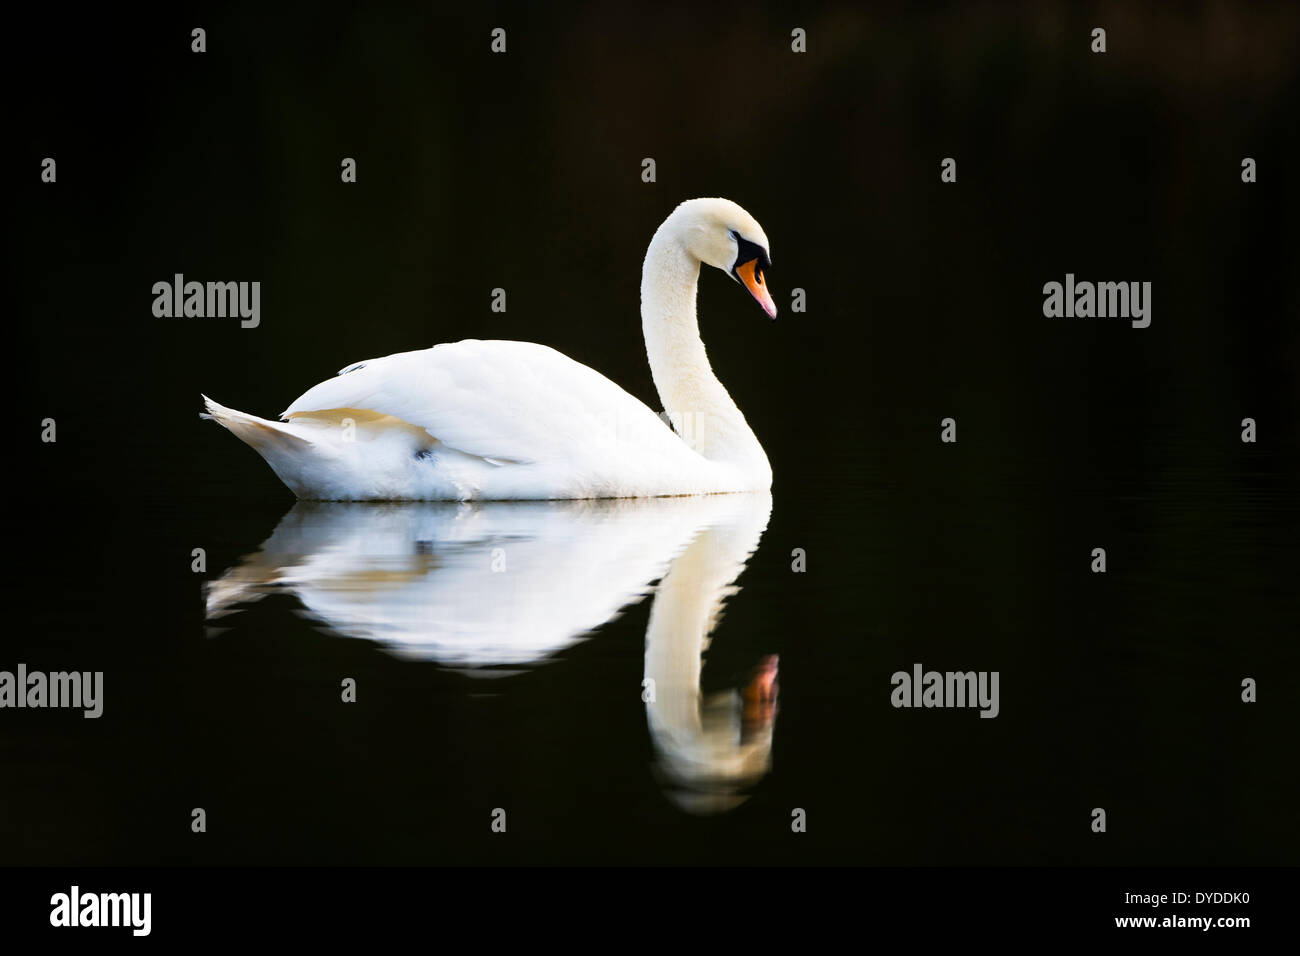 A Mute Swan swimming on the water. Stock Photo